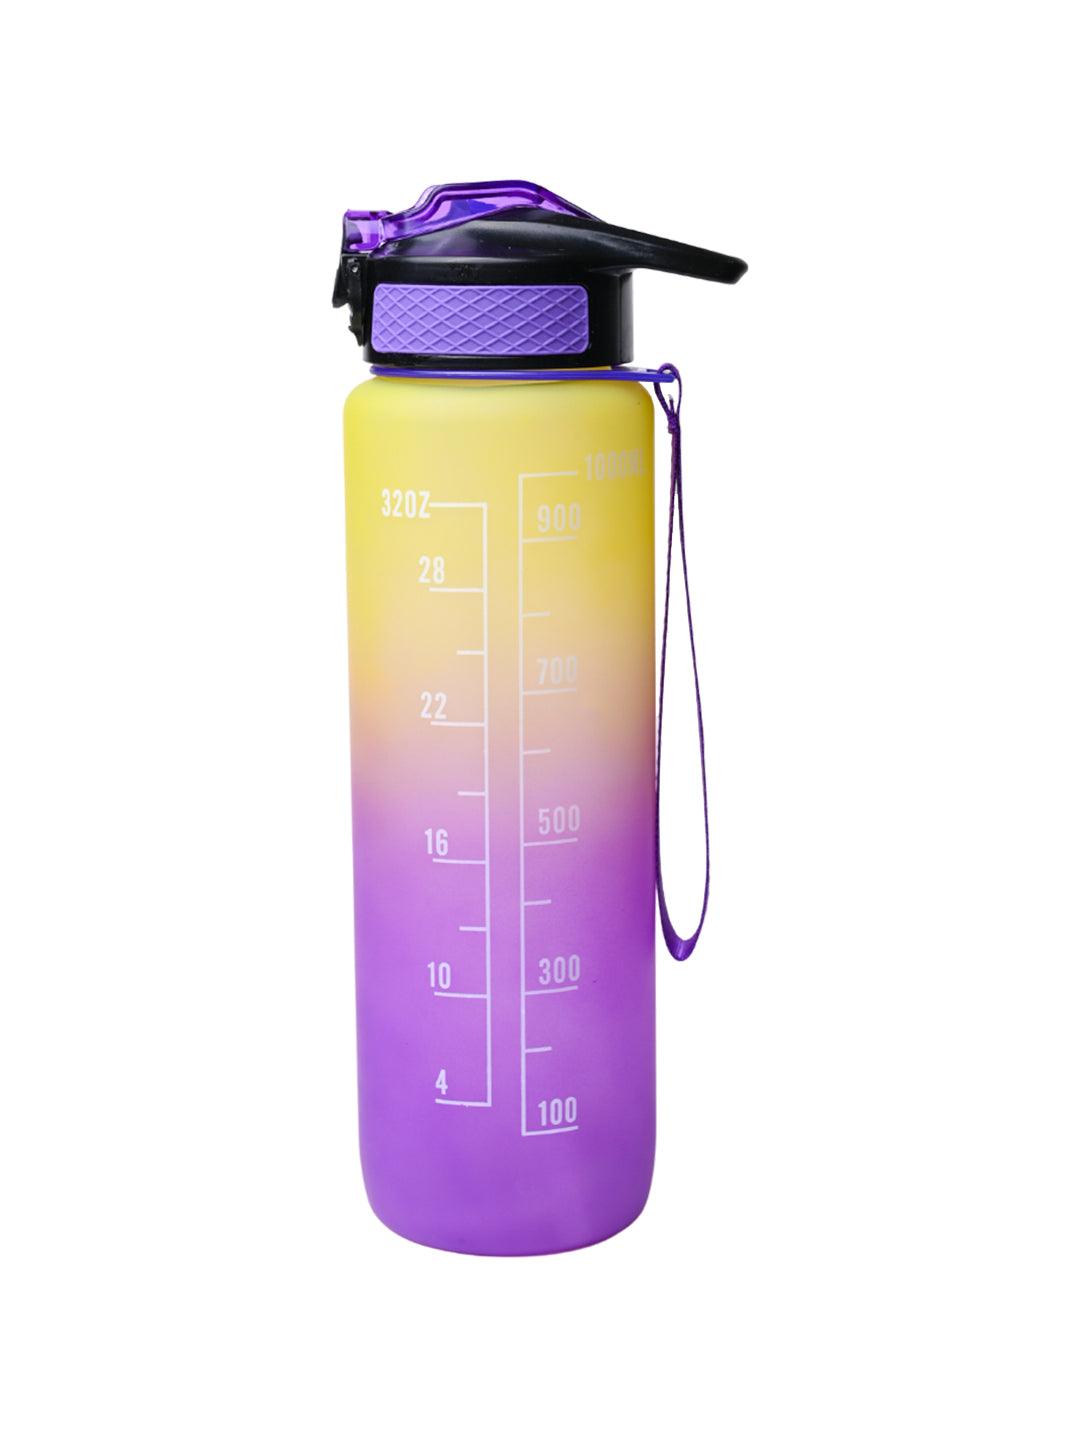 https://cdn.shopify.com/s/files/1/0267/1699/5754/files/market99-motivational-sipper-water-bottle-with-time-and-level-marker-yellow-purple-1-liter-water-bottles-2.jpg?v=1697016499&width=1080